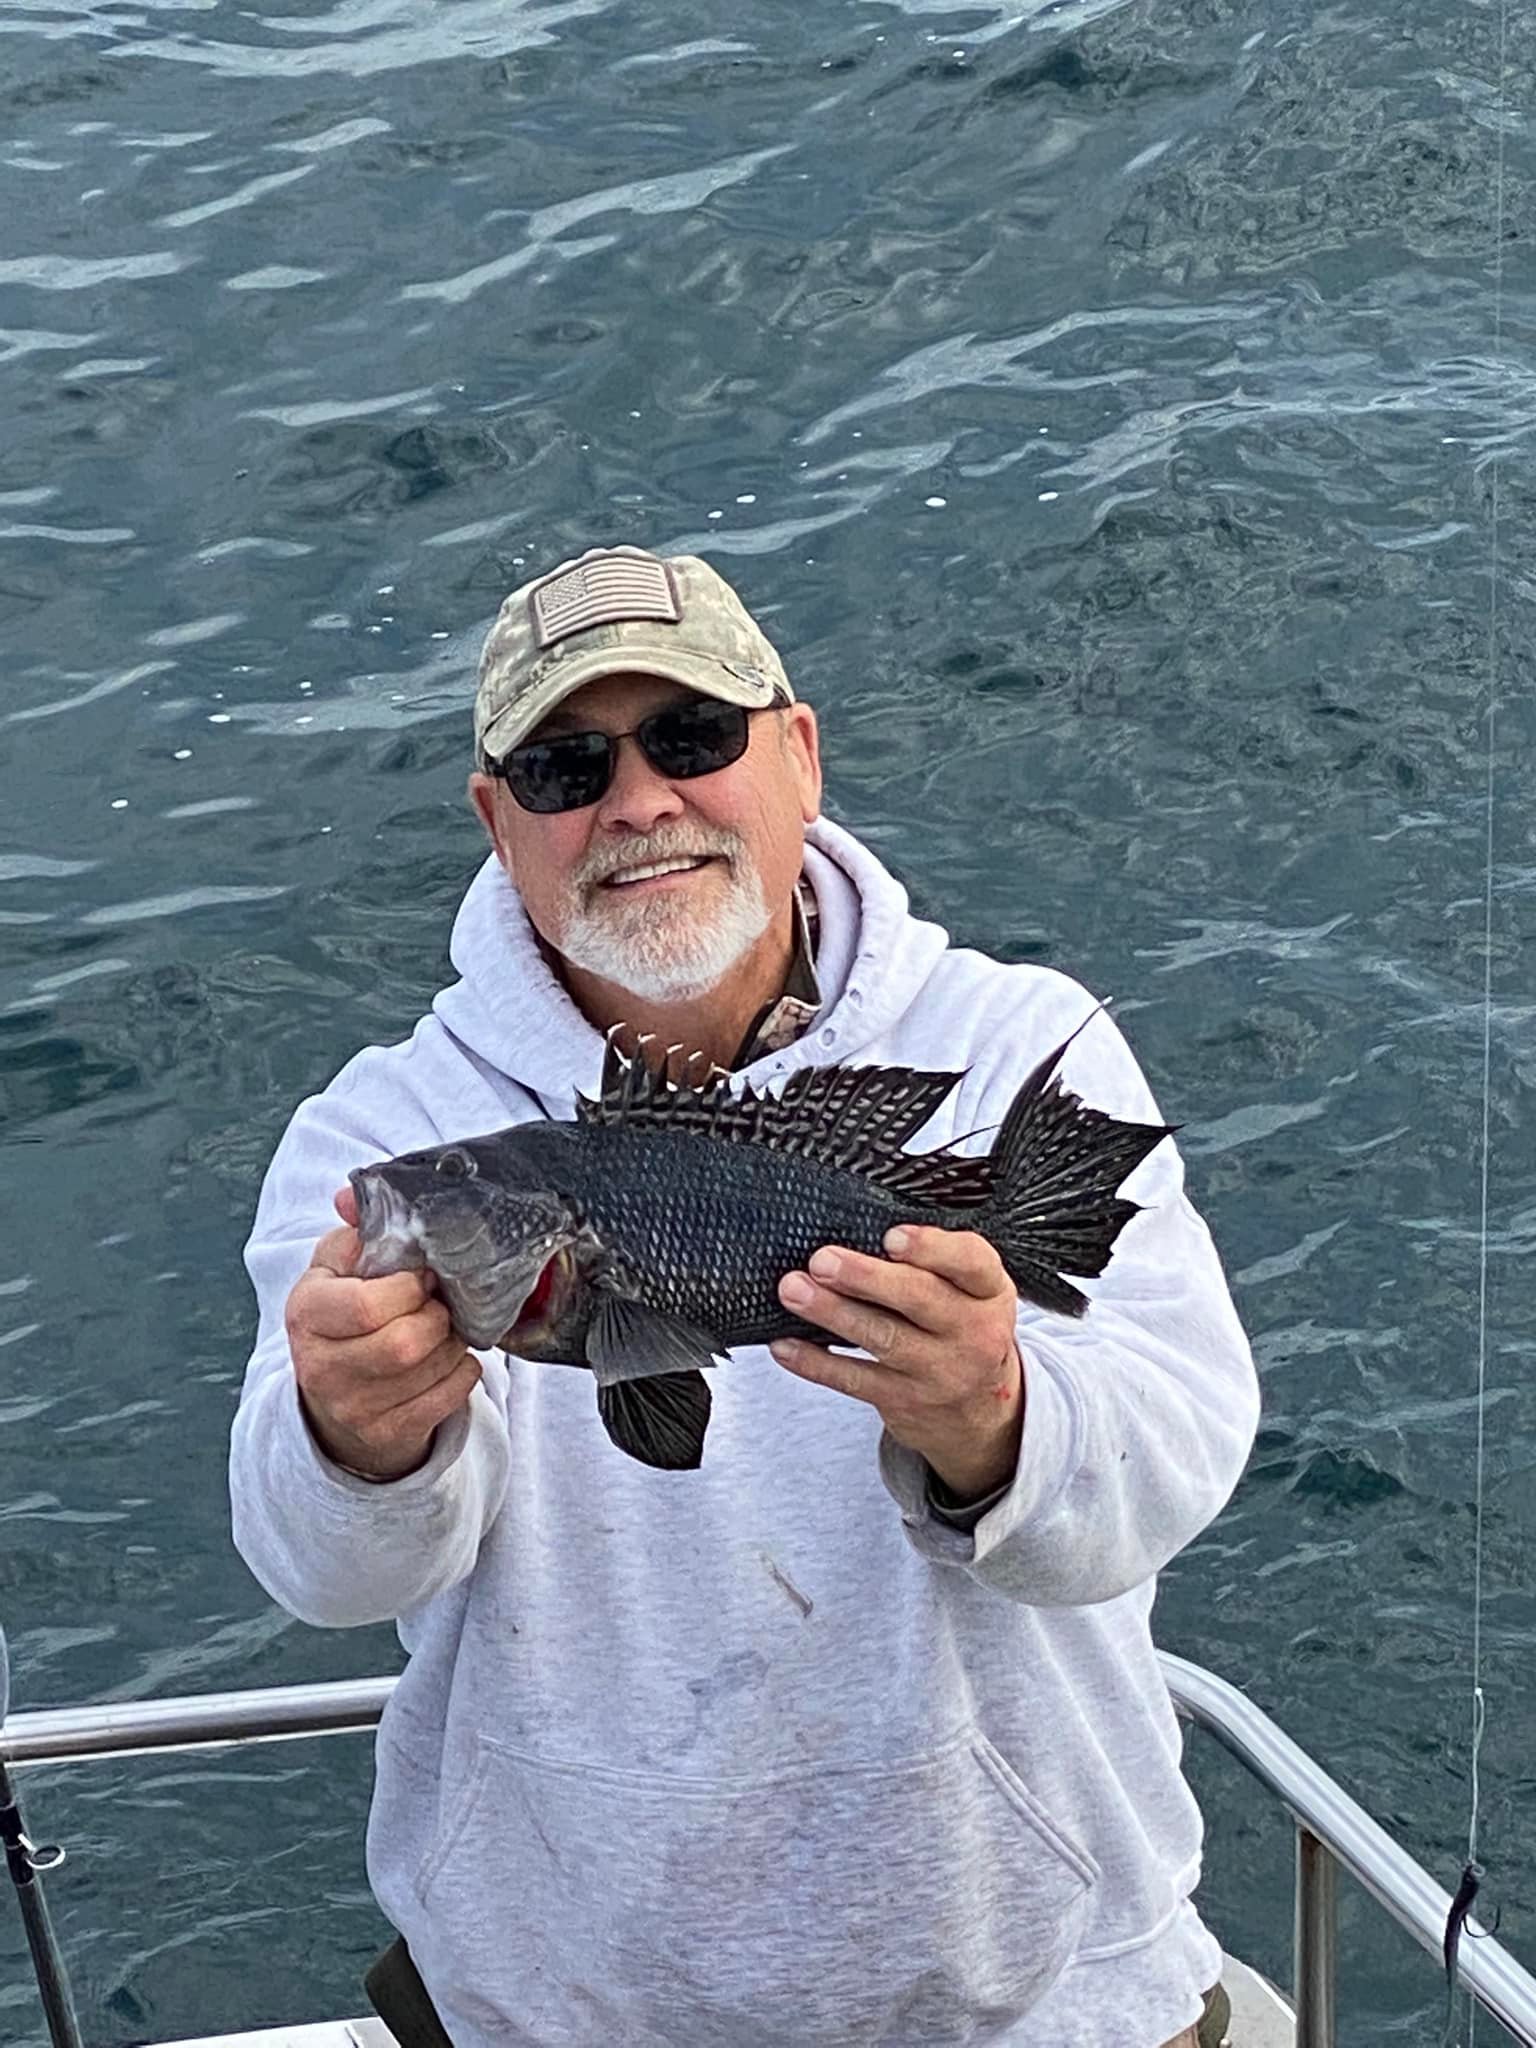 Rockfish, Flounder and More Limits of Sea Bass - Ocean City MD Fishing